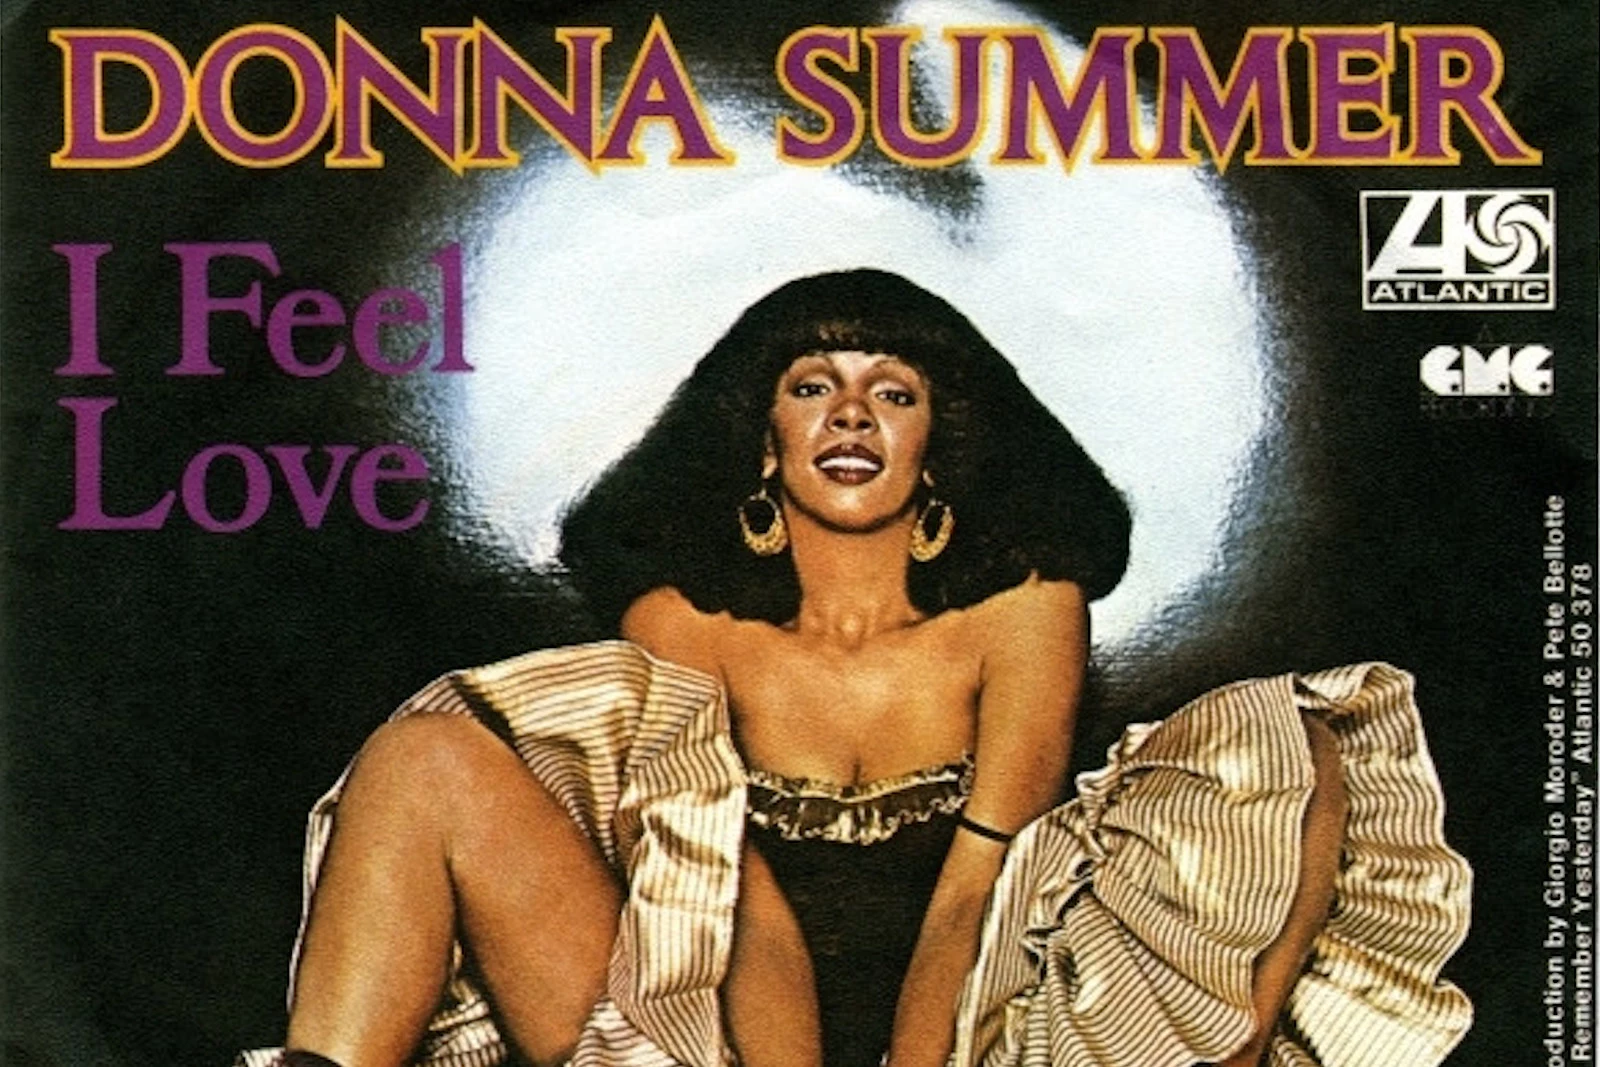 How Donna Summer Created the Sound of the Future on 'I Feel Love'